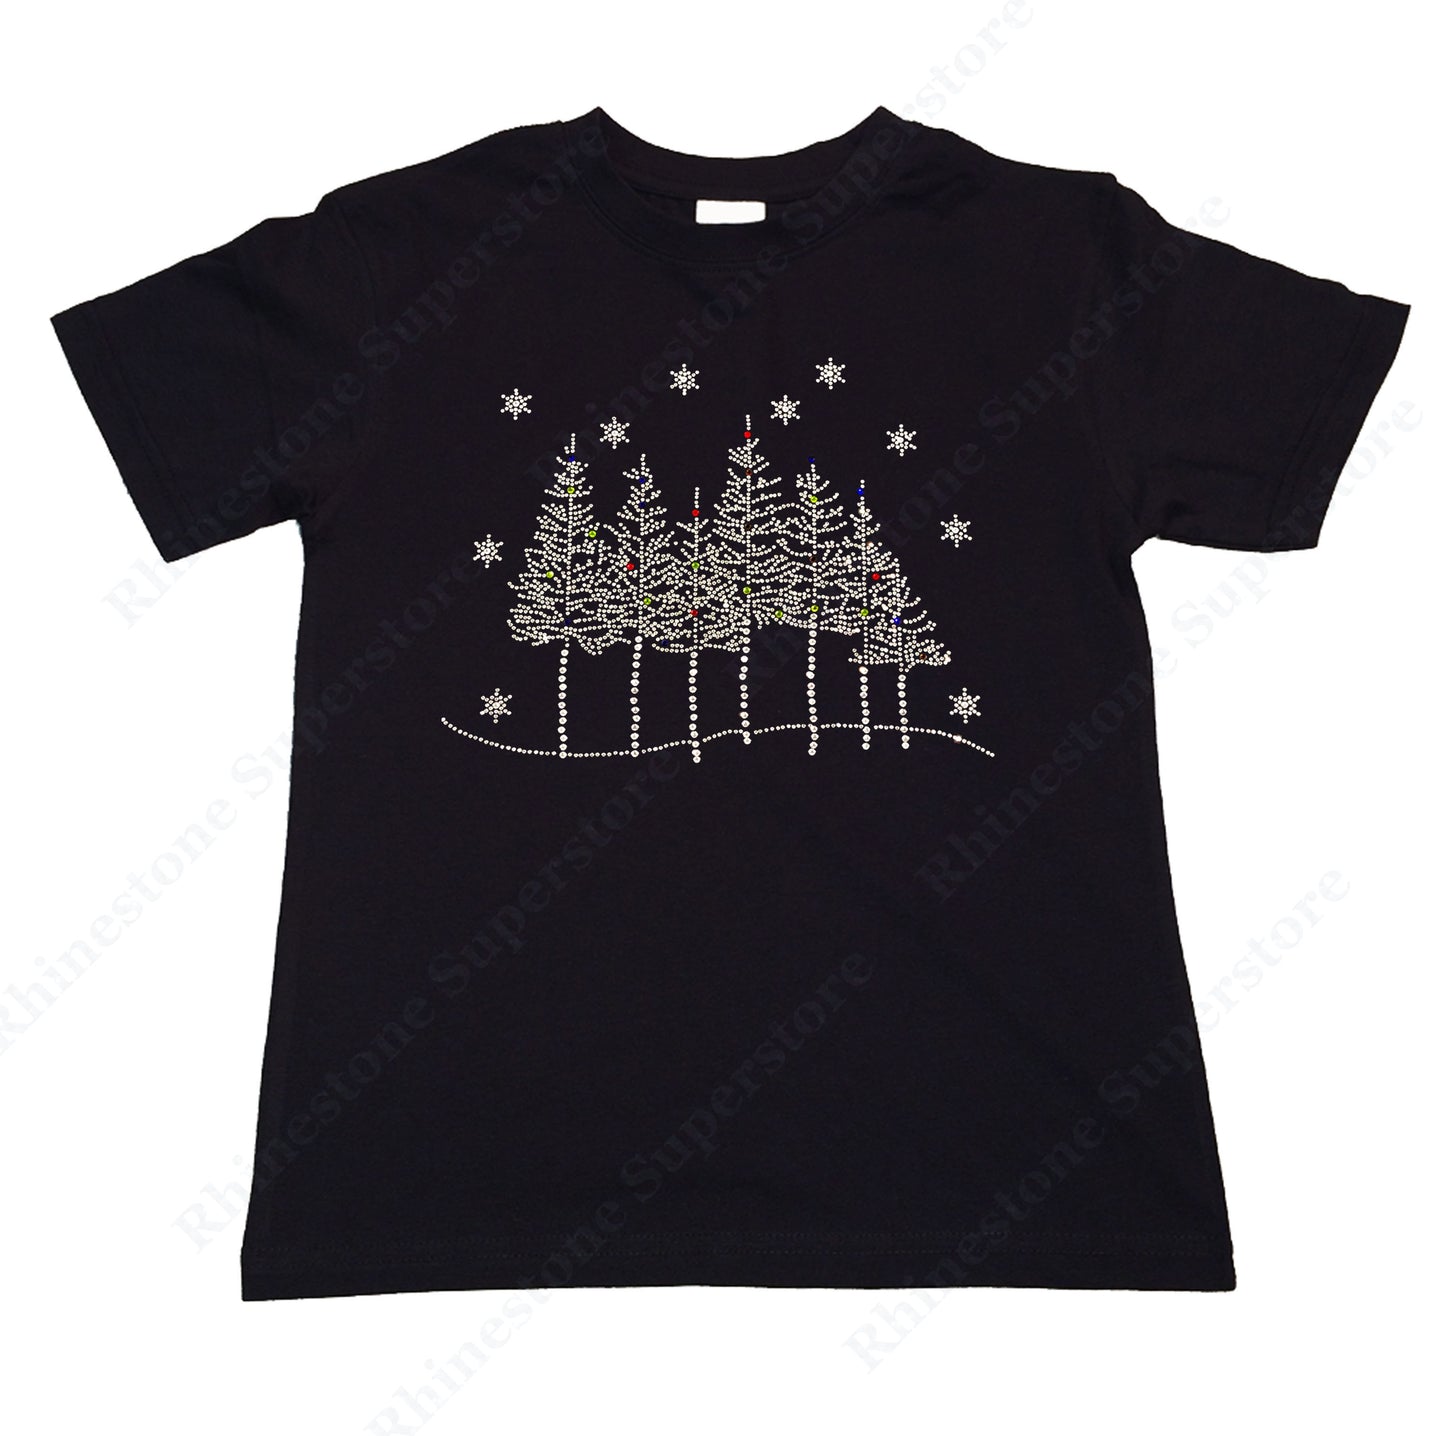 Girls Rhinestone T-Shirt " Tree Line Scene with Snowflakes in Rhinestones " Kids Size 3 to 14 Available